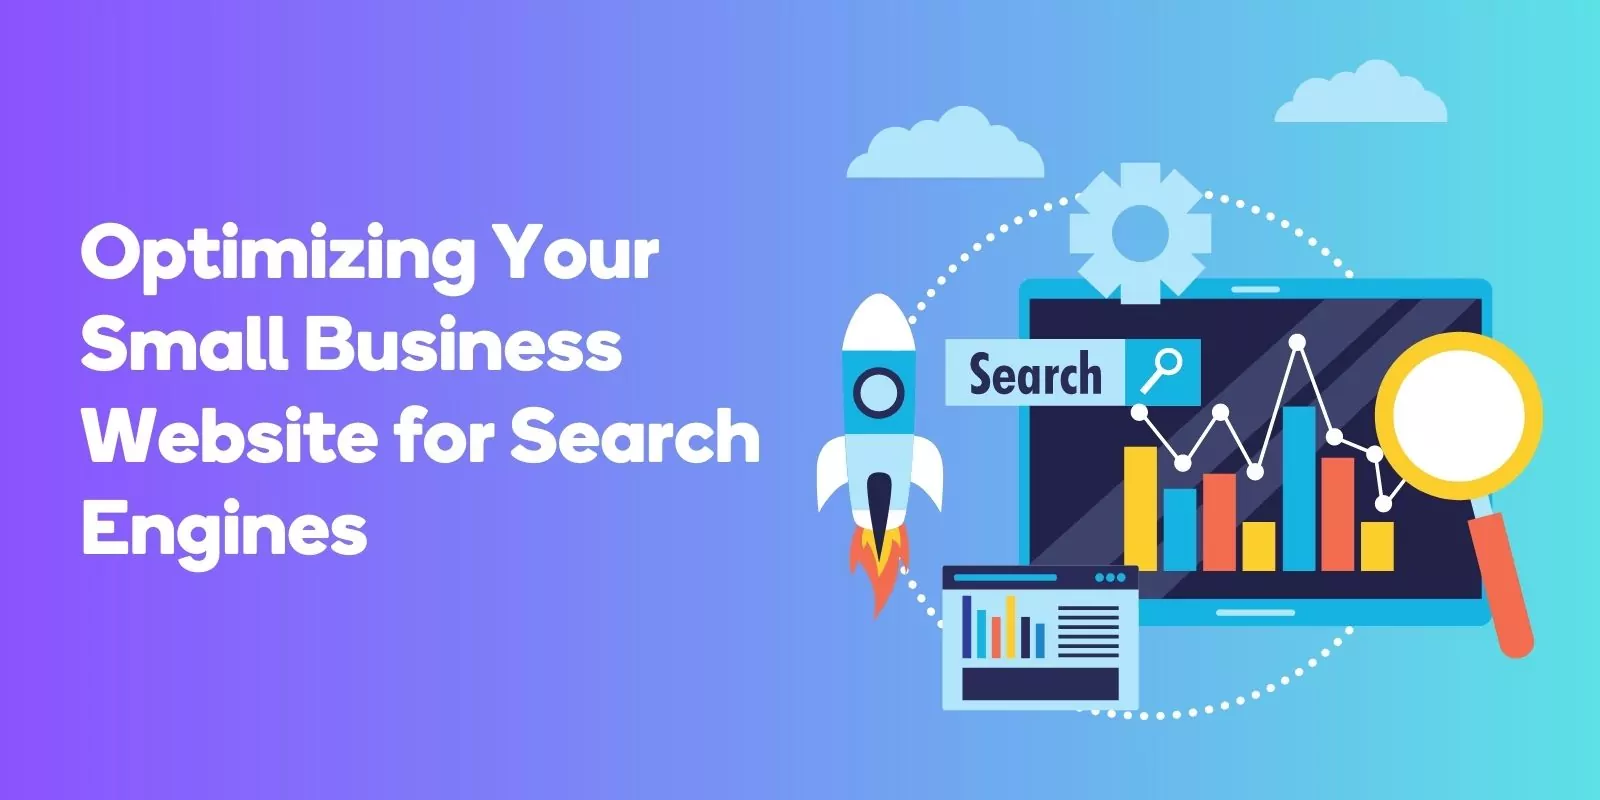 Optimizing Your Small Business Website for Search Engines